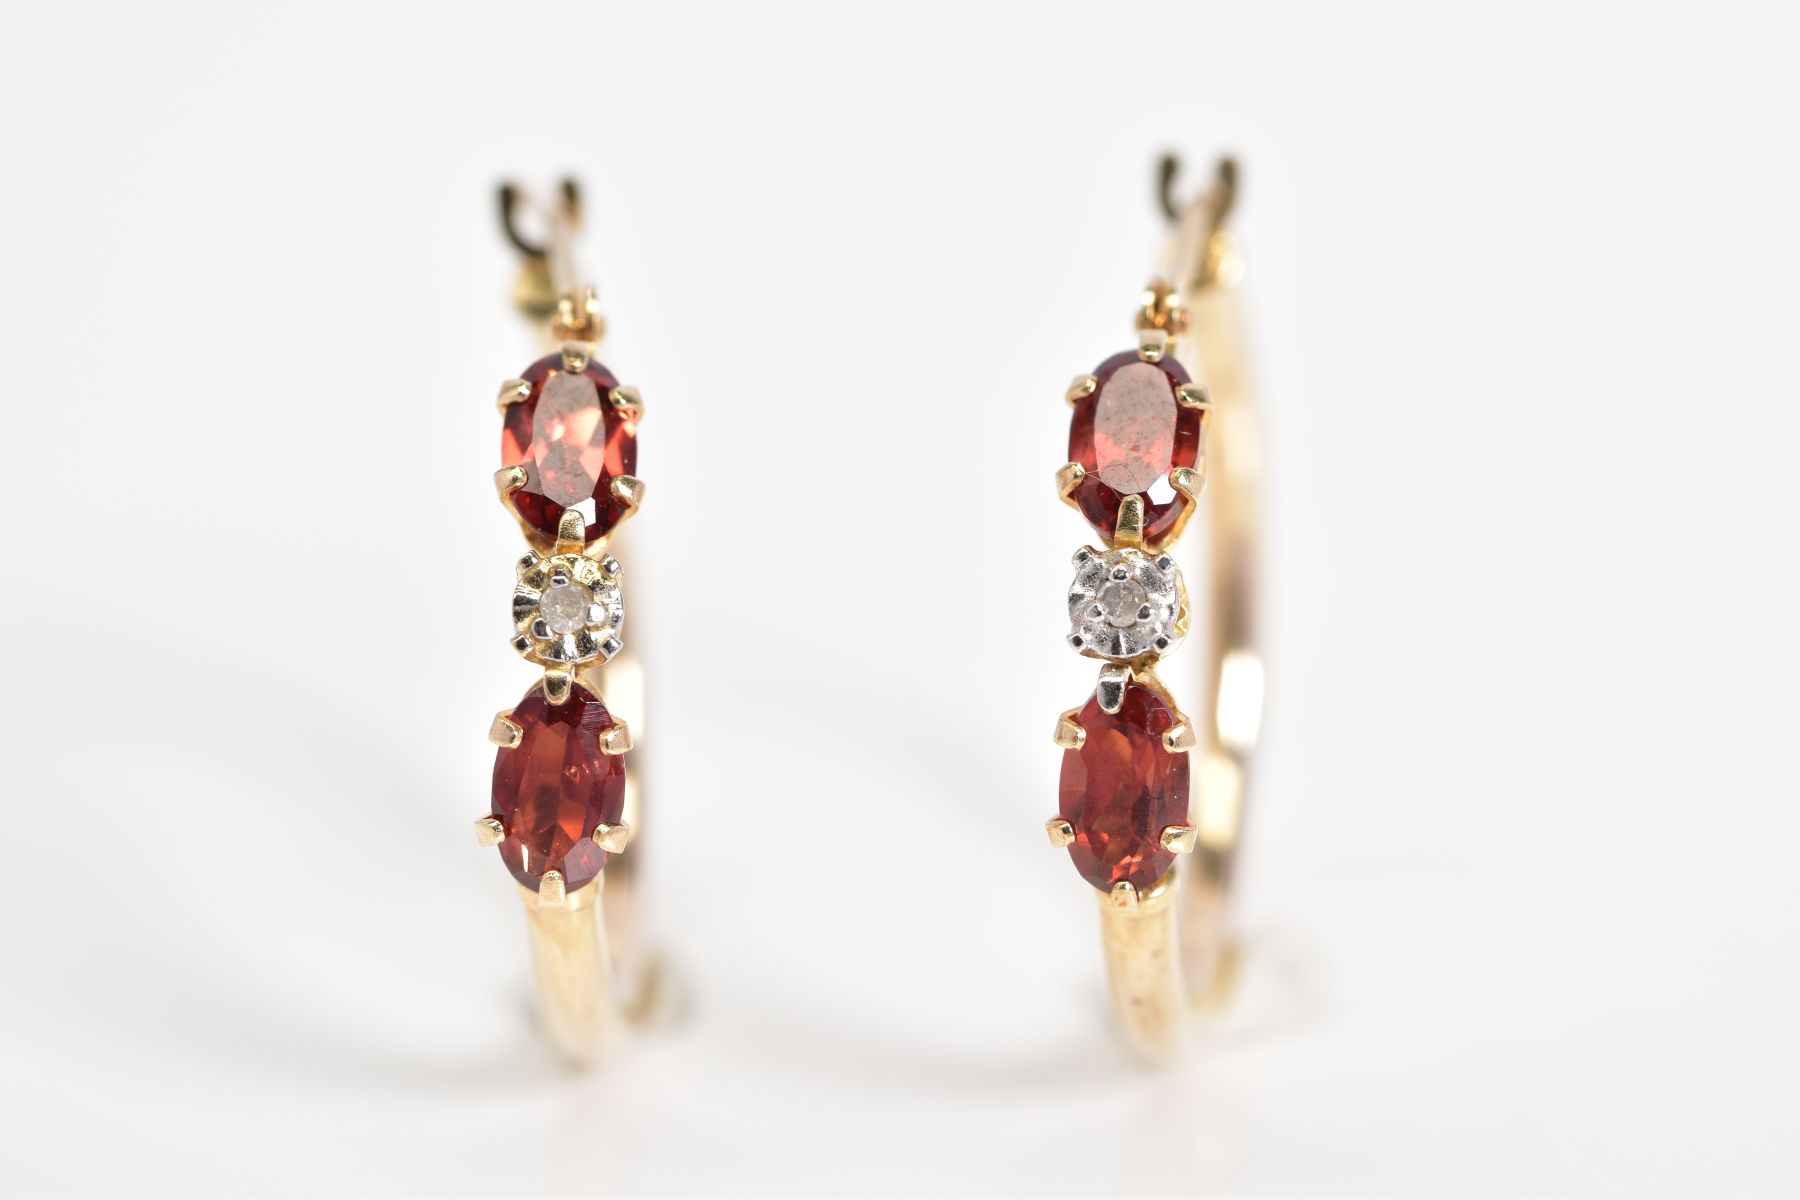 A PAIR OF TOURMALINE AND DIAMOND HOOP EARRINGS, each set with two oval cut reddish/brown tourmalines - Image 3 of 3